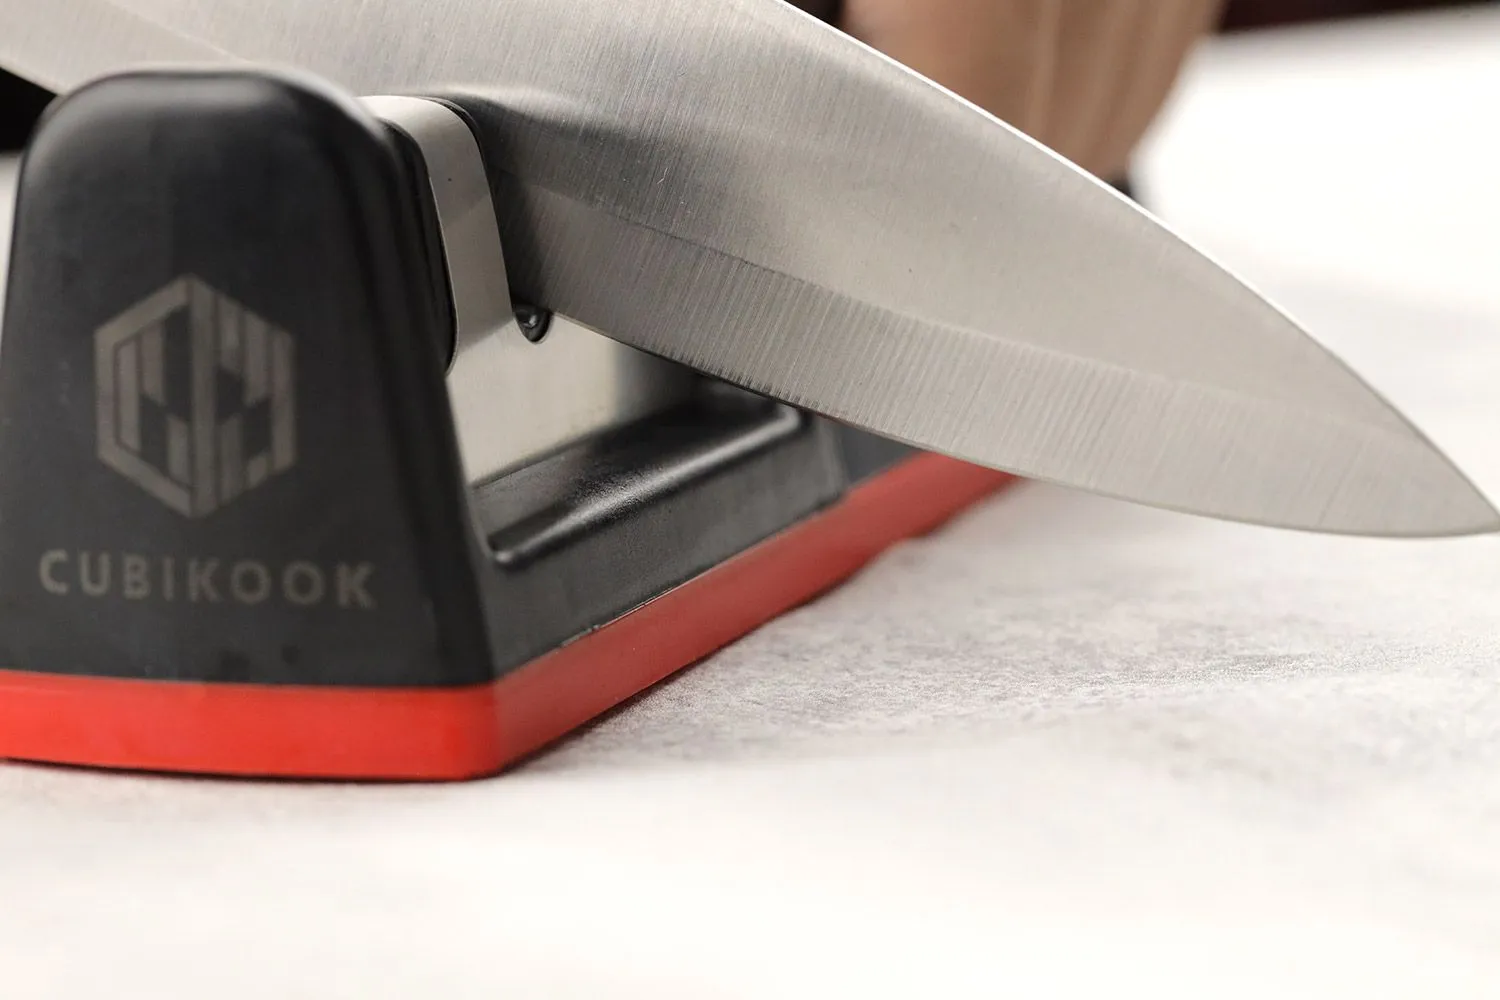  Cubikook Kitchen Knife Sharpener - Complete 3-stage Knife  Sharpener CS-T01 with Diamond Dust Rods, Sturdy Design, Non-slip Base Pat,  Easy and Safe to Use, Fast and Effective Manual Sharpening Tool: Home